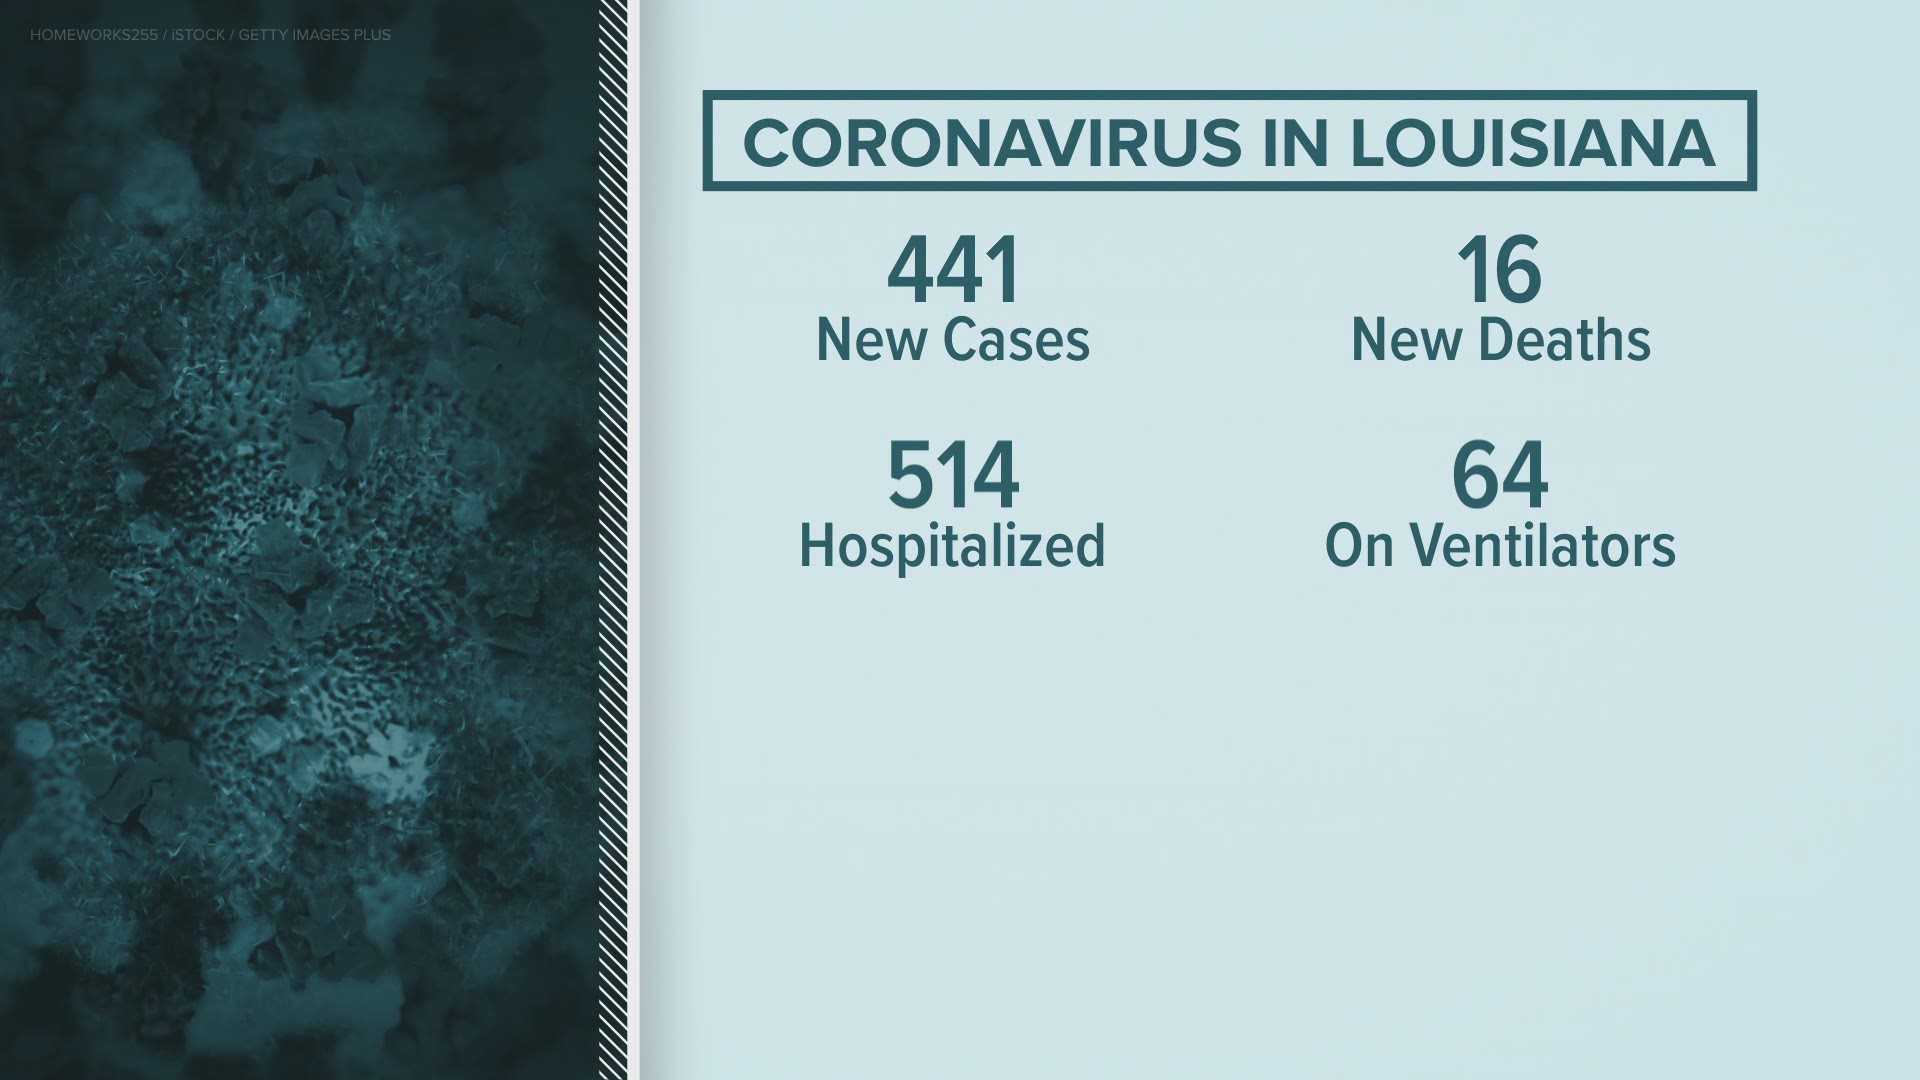 COVID-19 hospitalizations have significantly decreased in Louisiana after reaching record-setting peaks in the first week of January.